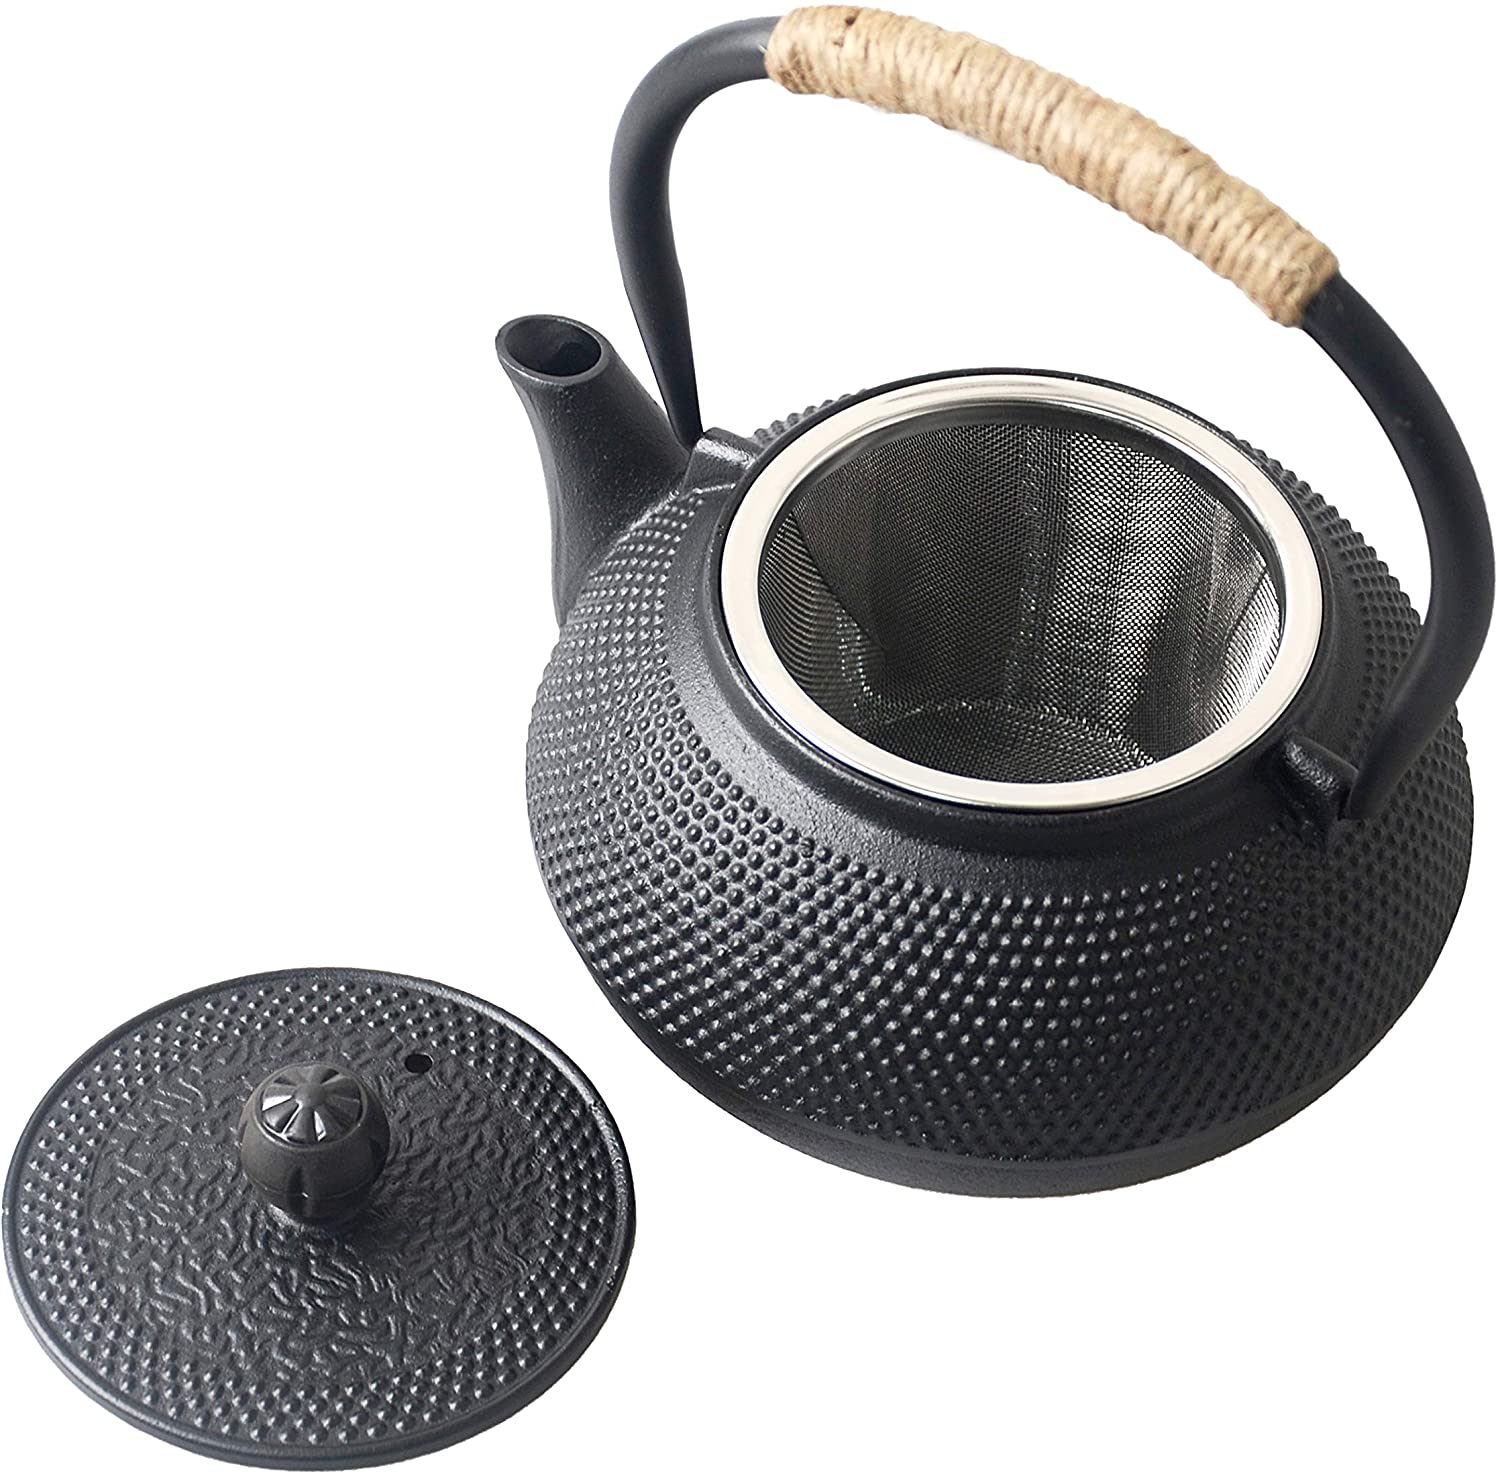 HwaGui Cast Iron Teapot with Infuser for Loose Leaf 0.8 l, Japanese Tea Pot as Healthy Craft Gift 800ml